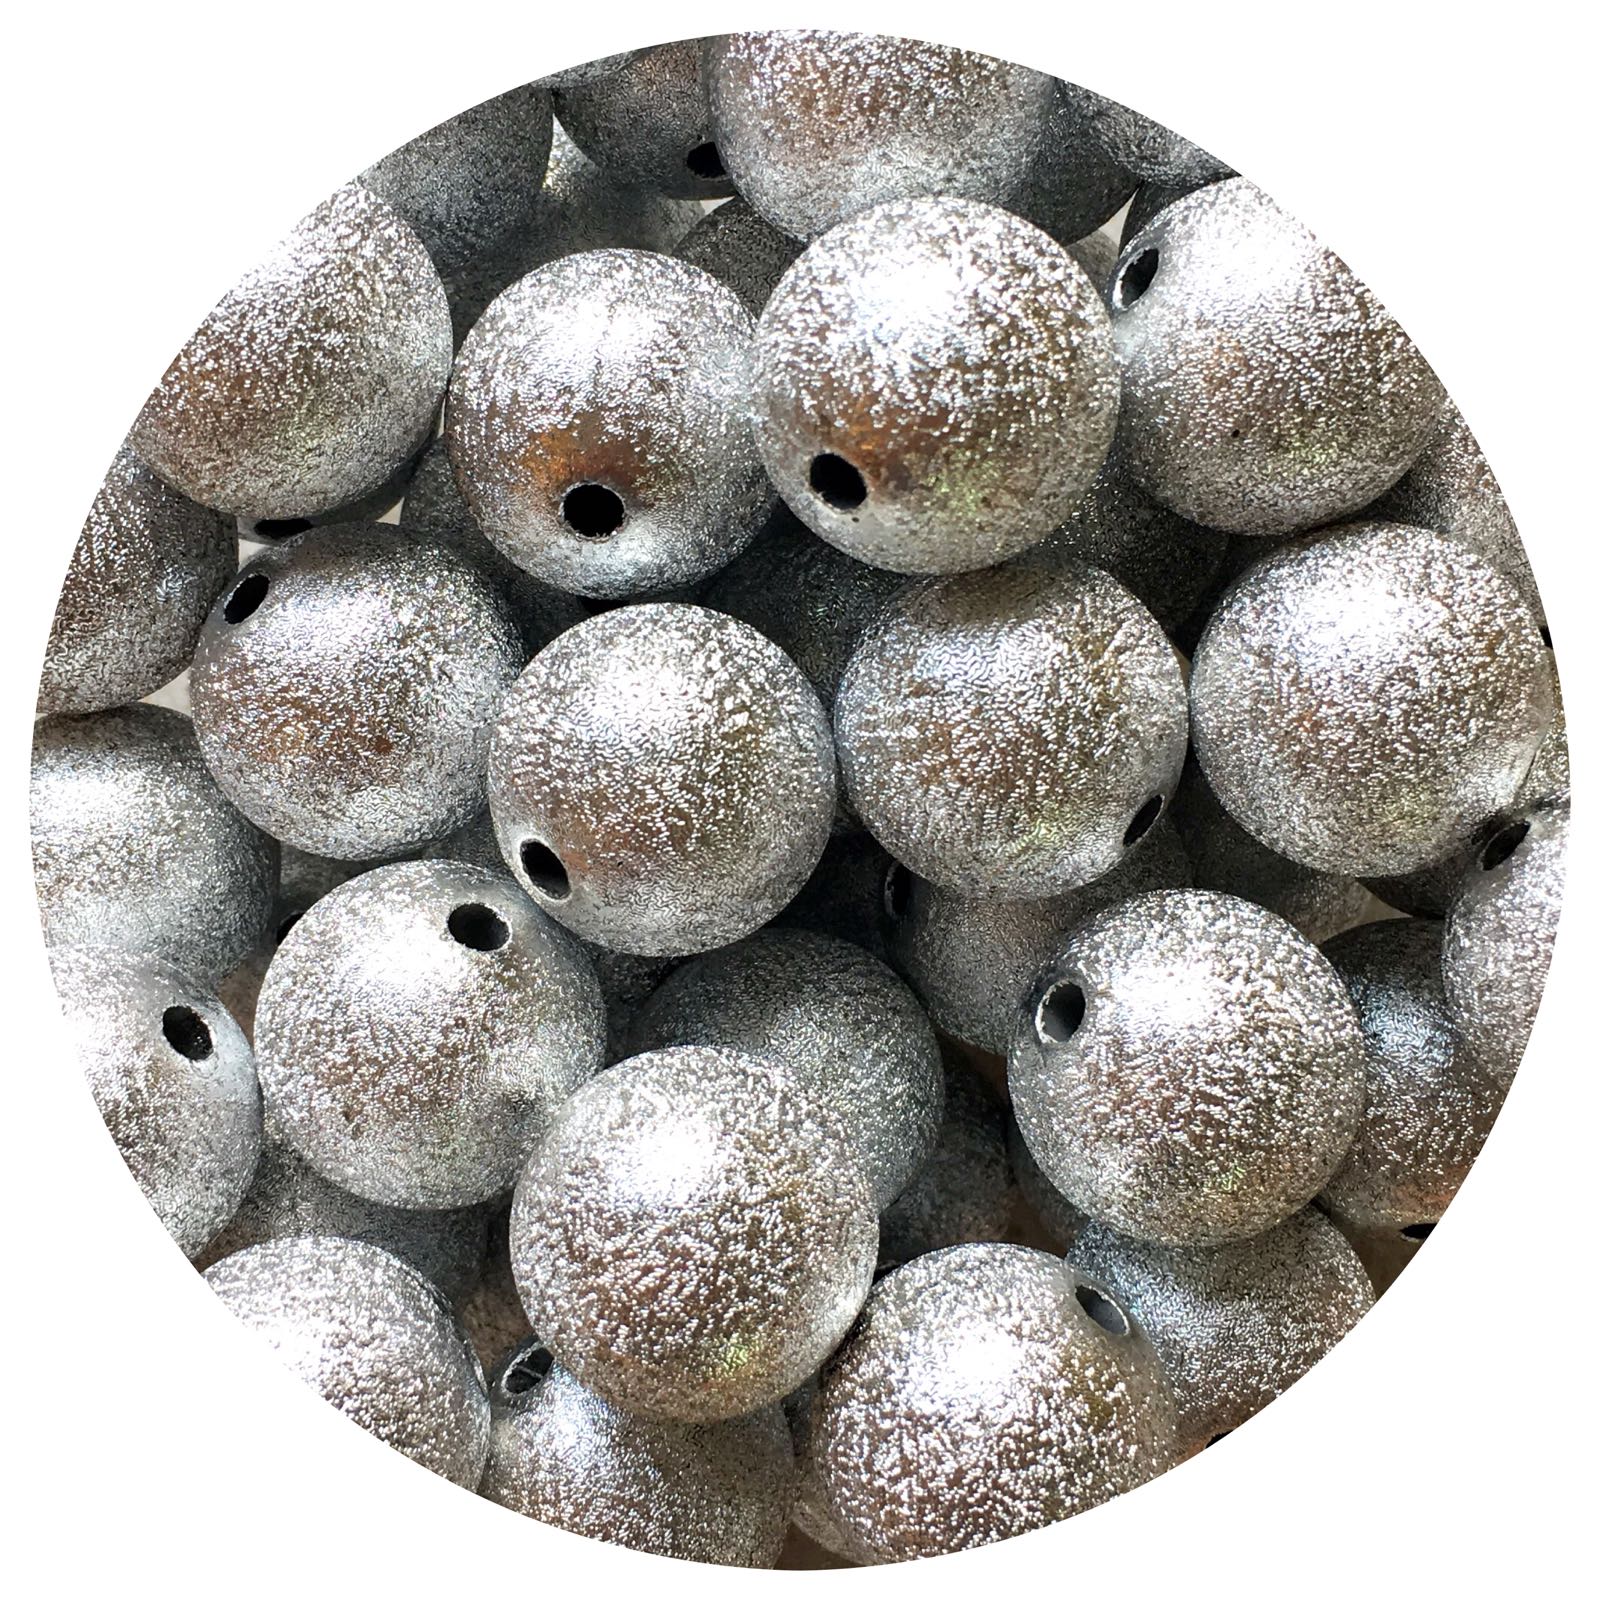 20mm Silver Stardust Round Acrylic Beads - 5 Beads